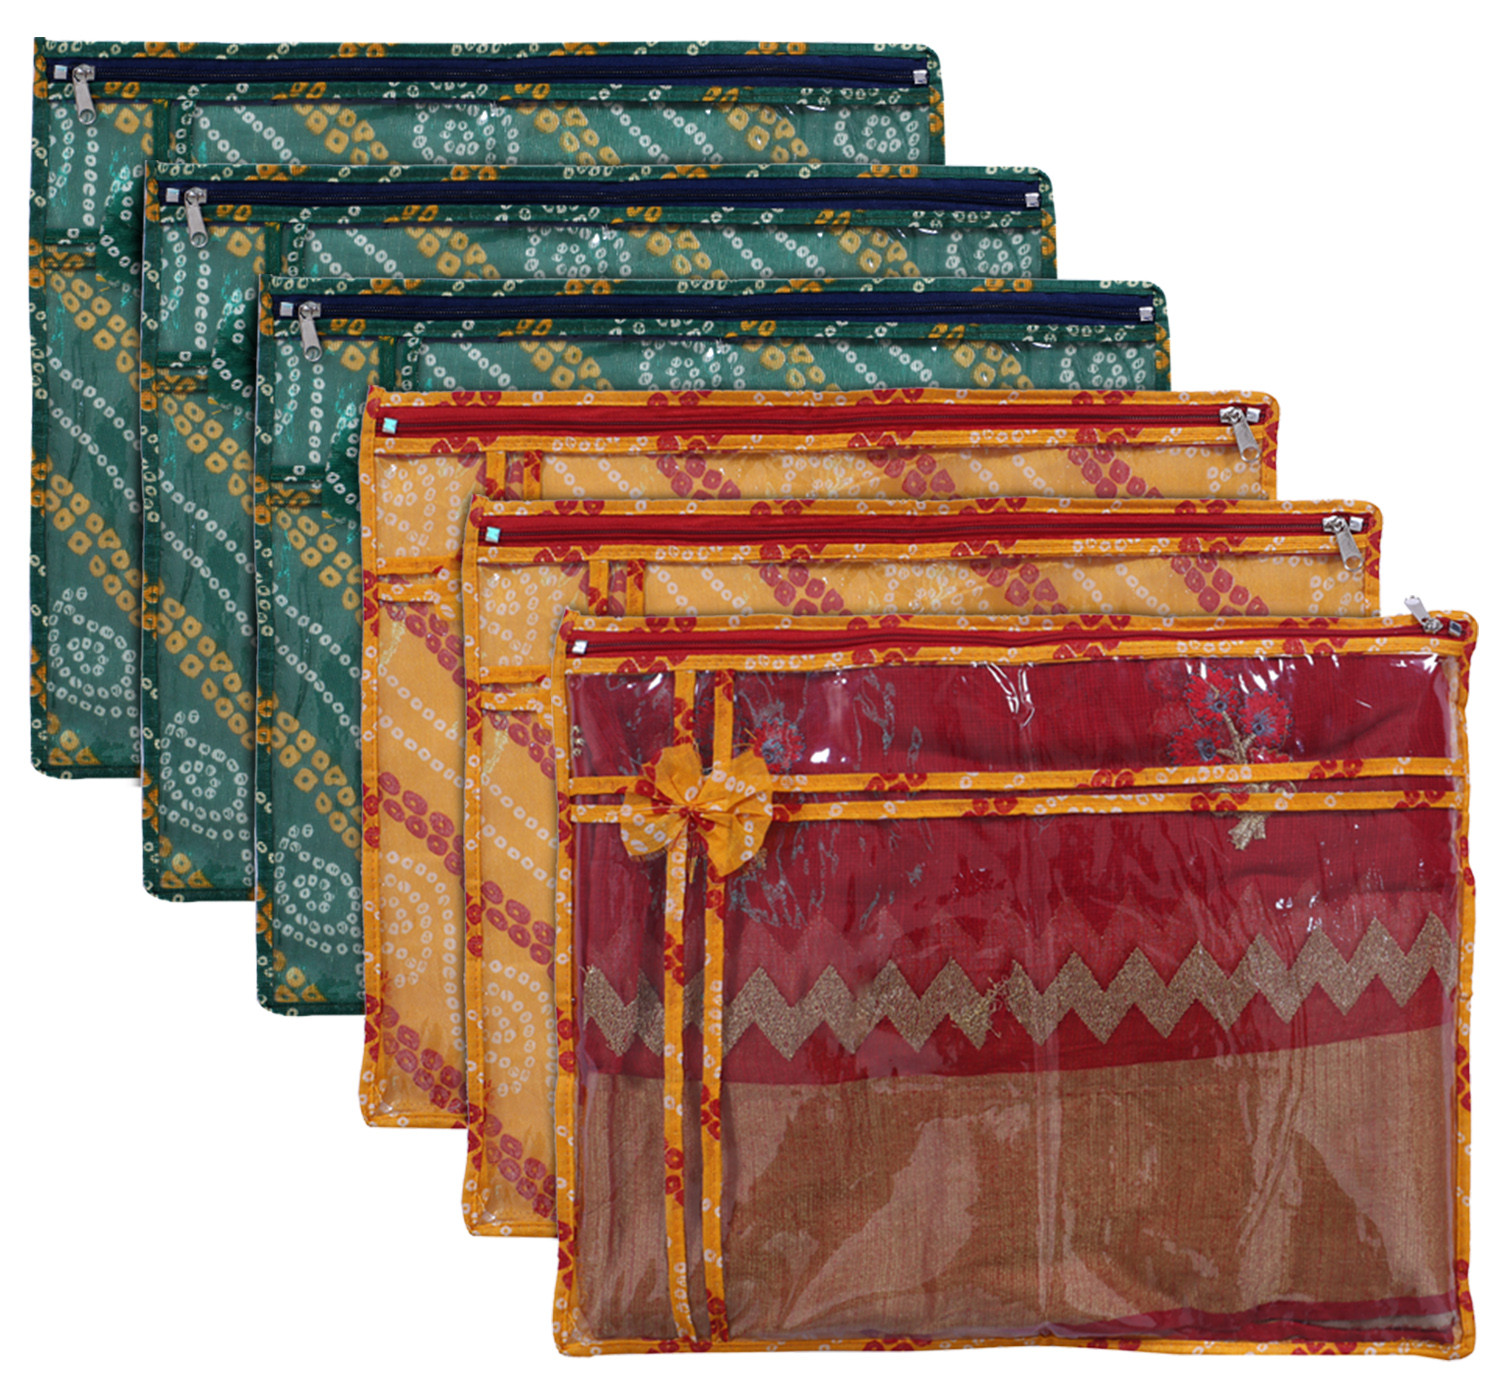 Kuber Industries Bandhani Print PVC Foldable Single Saree Cover|Clothes Storage For Saree, Lehenga, Suit With Transparent Pack of 6 (Yellow & Green)